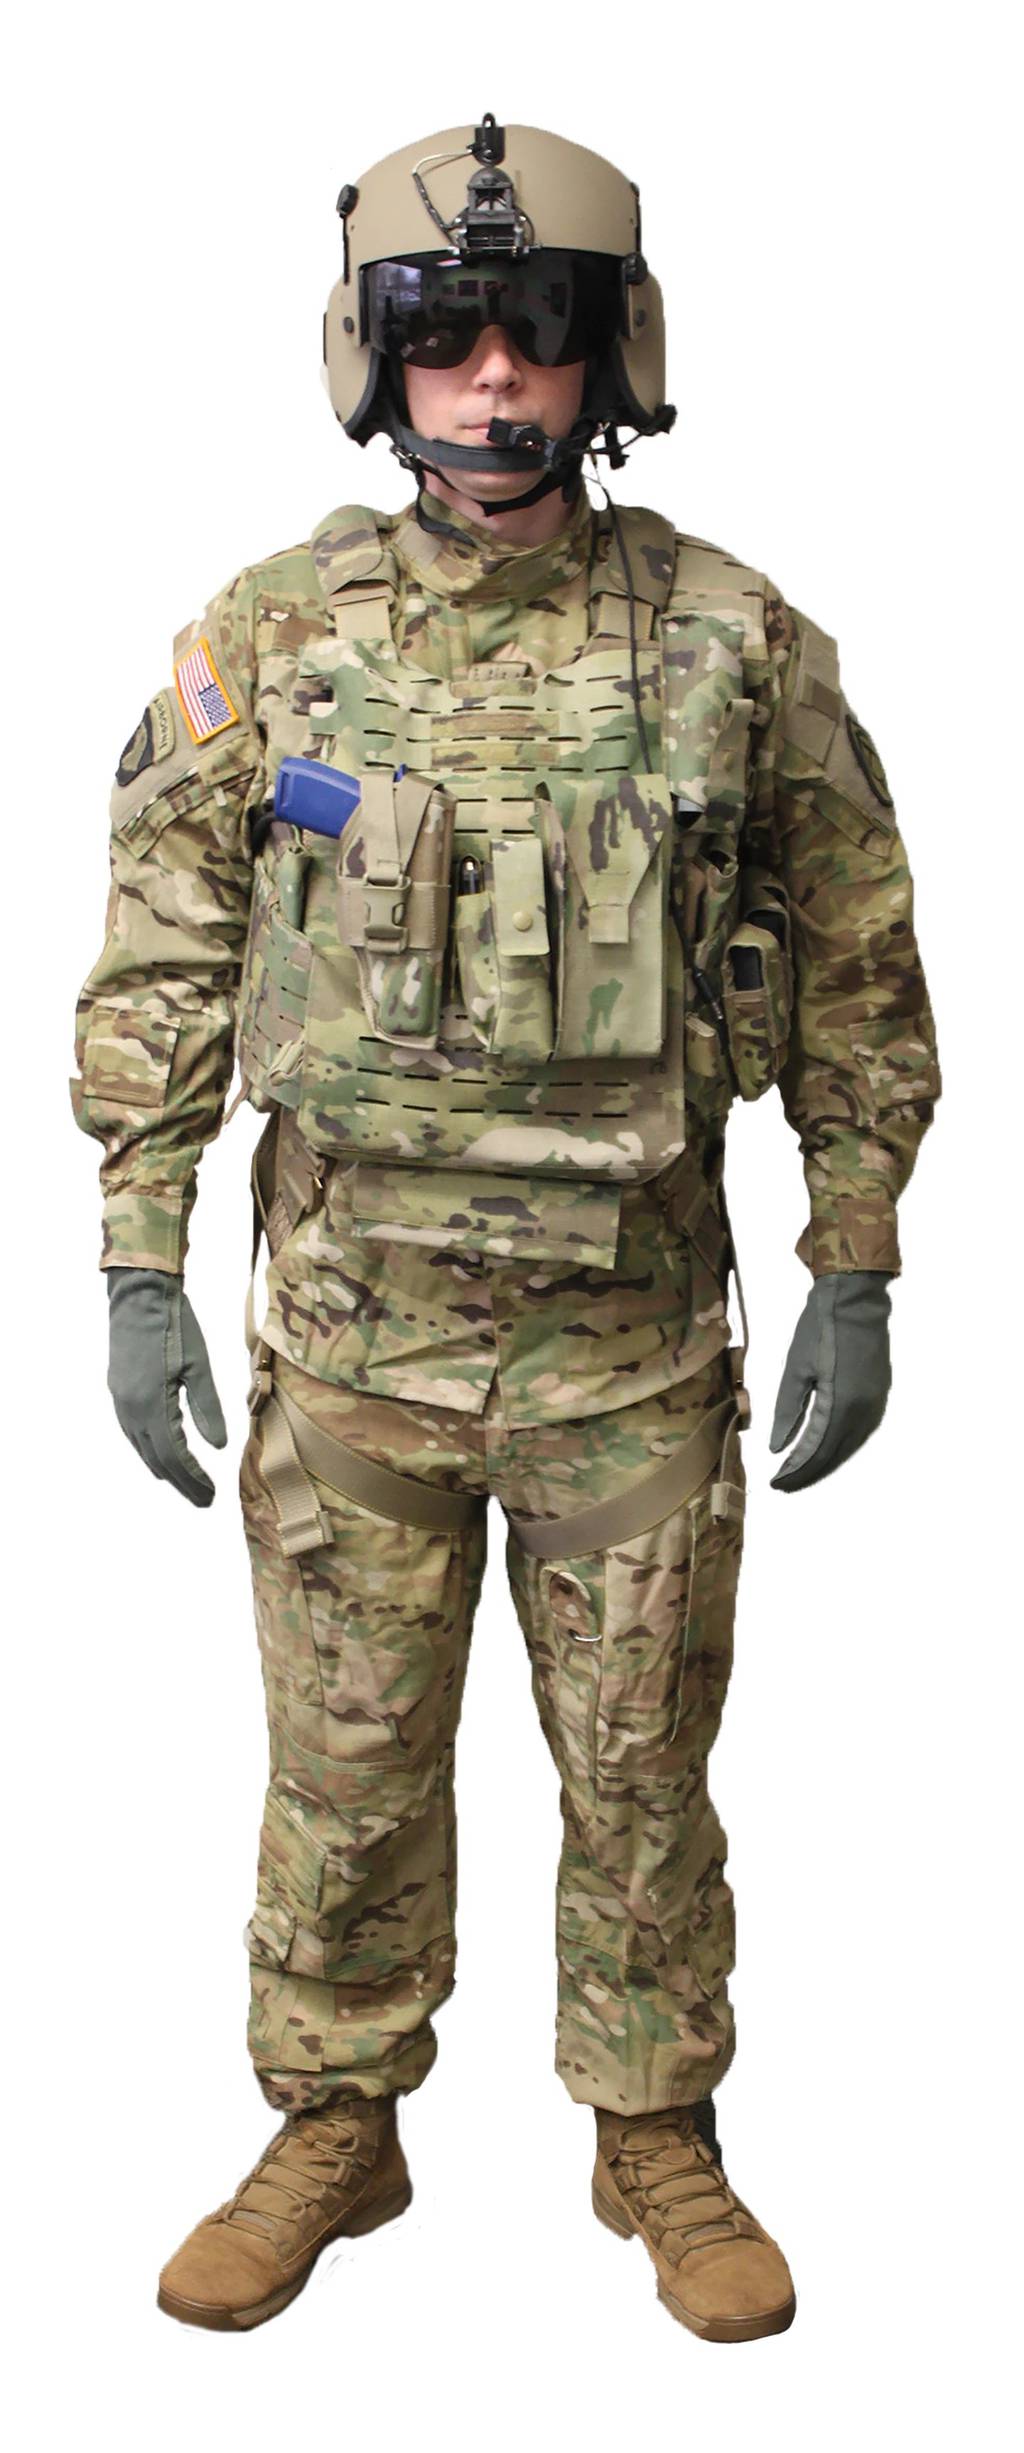 Gear updates from the center for all things soldier kit